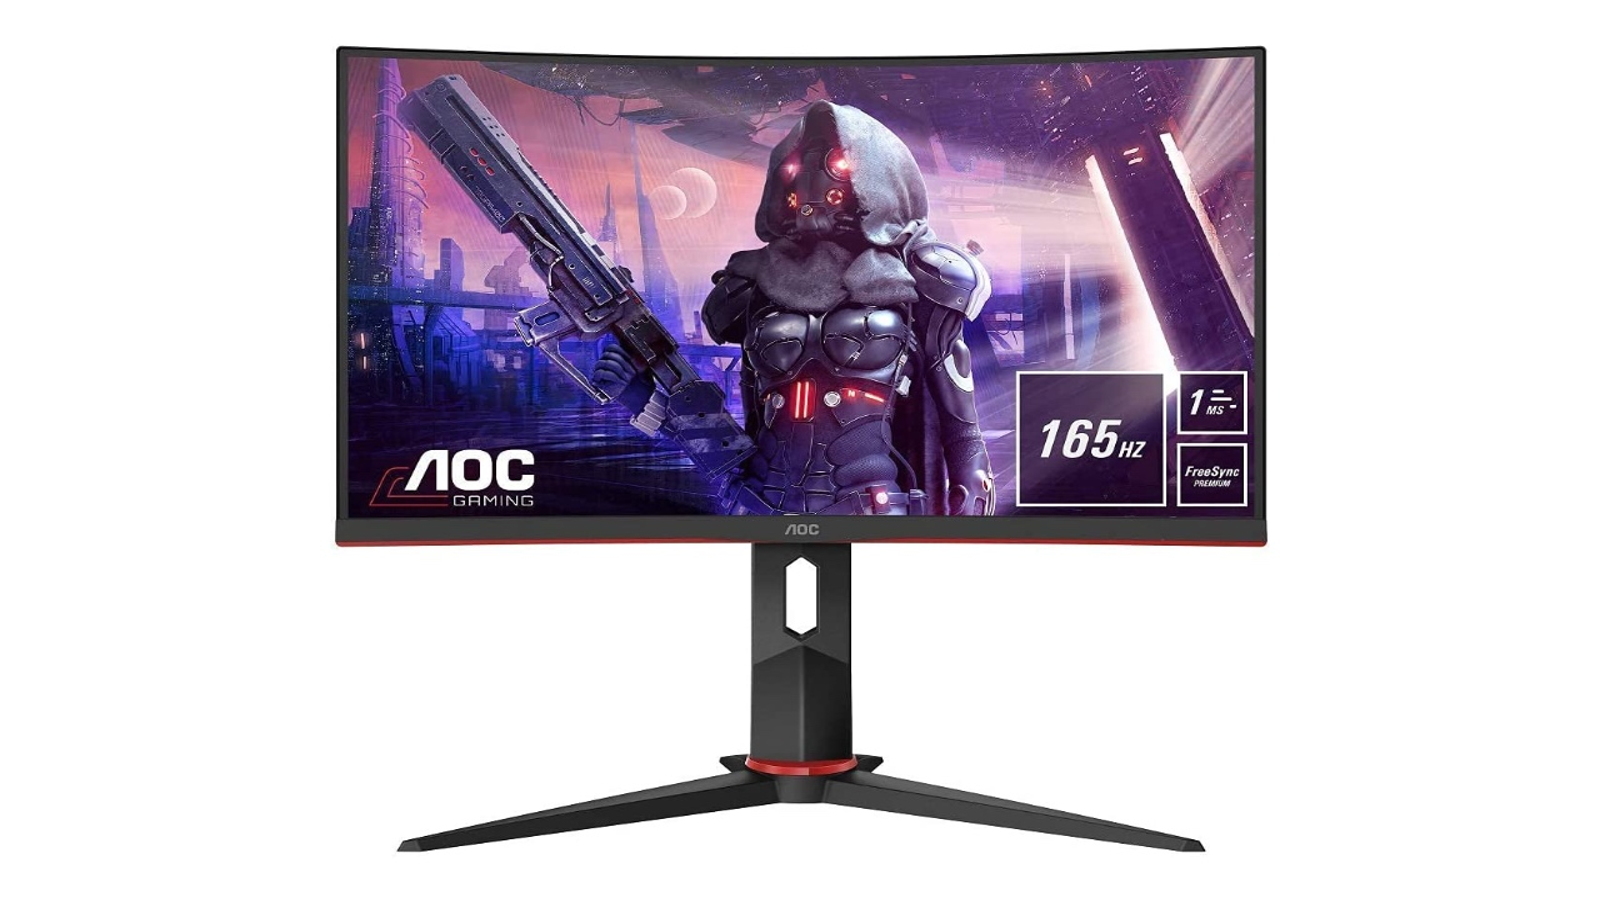 This curved full HD gaming monitor from AOC, with a 165Hz refresh rate, is  under £130 right now